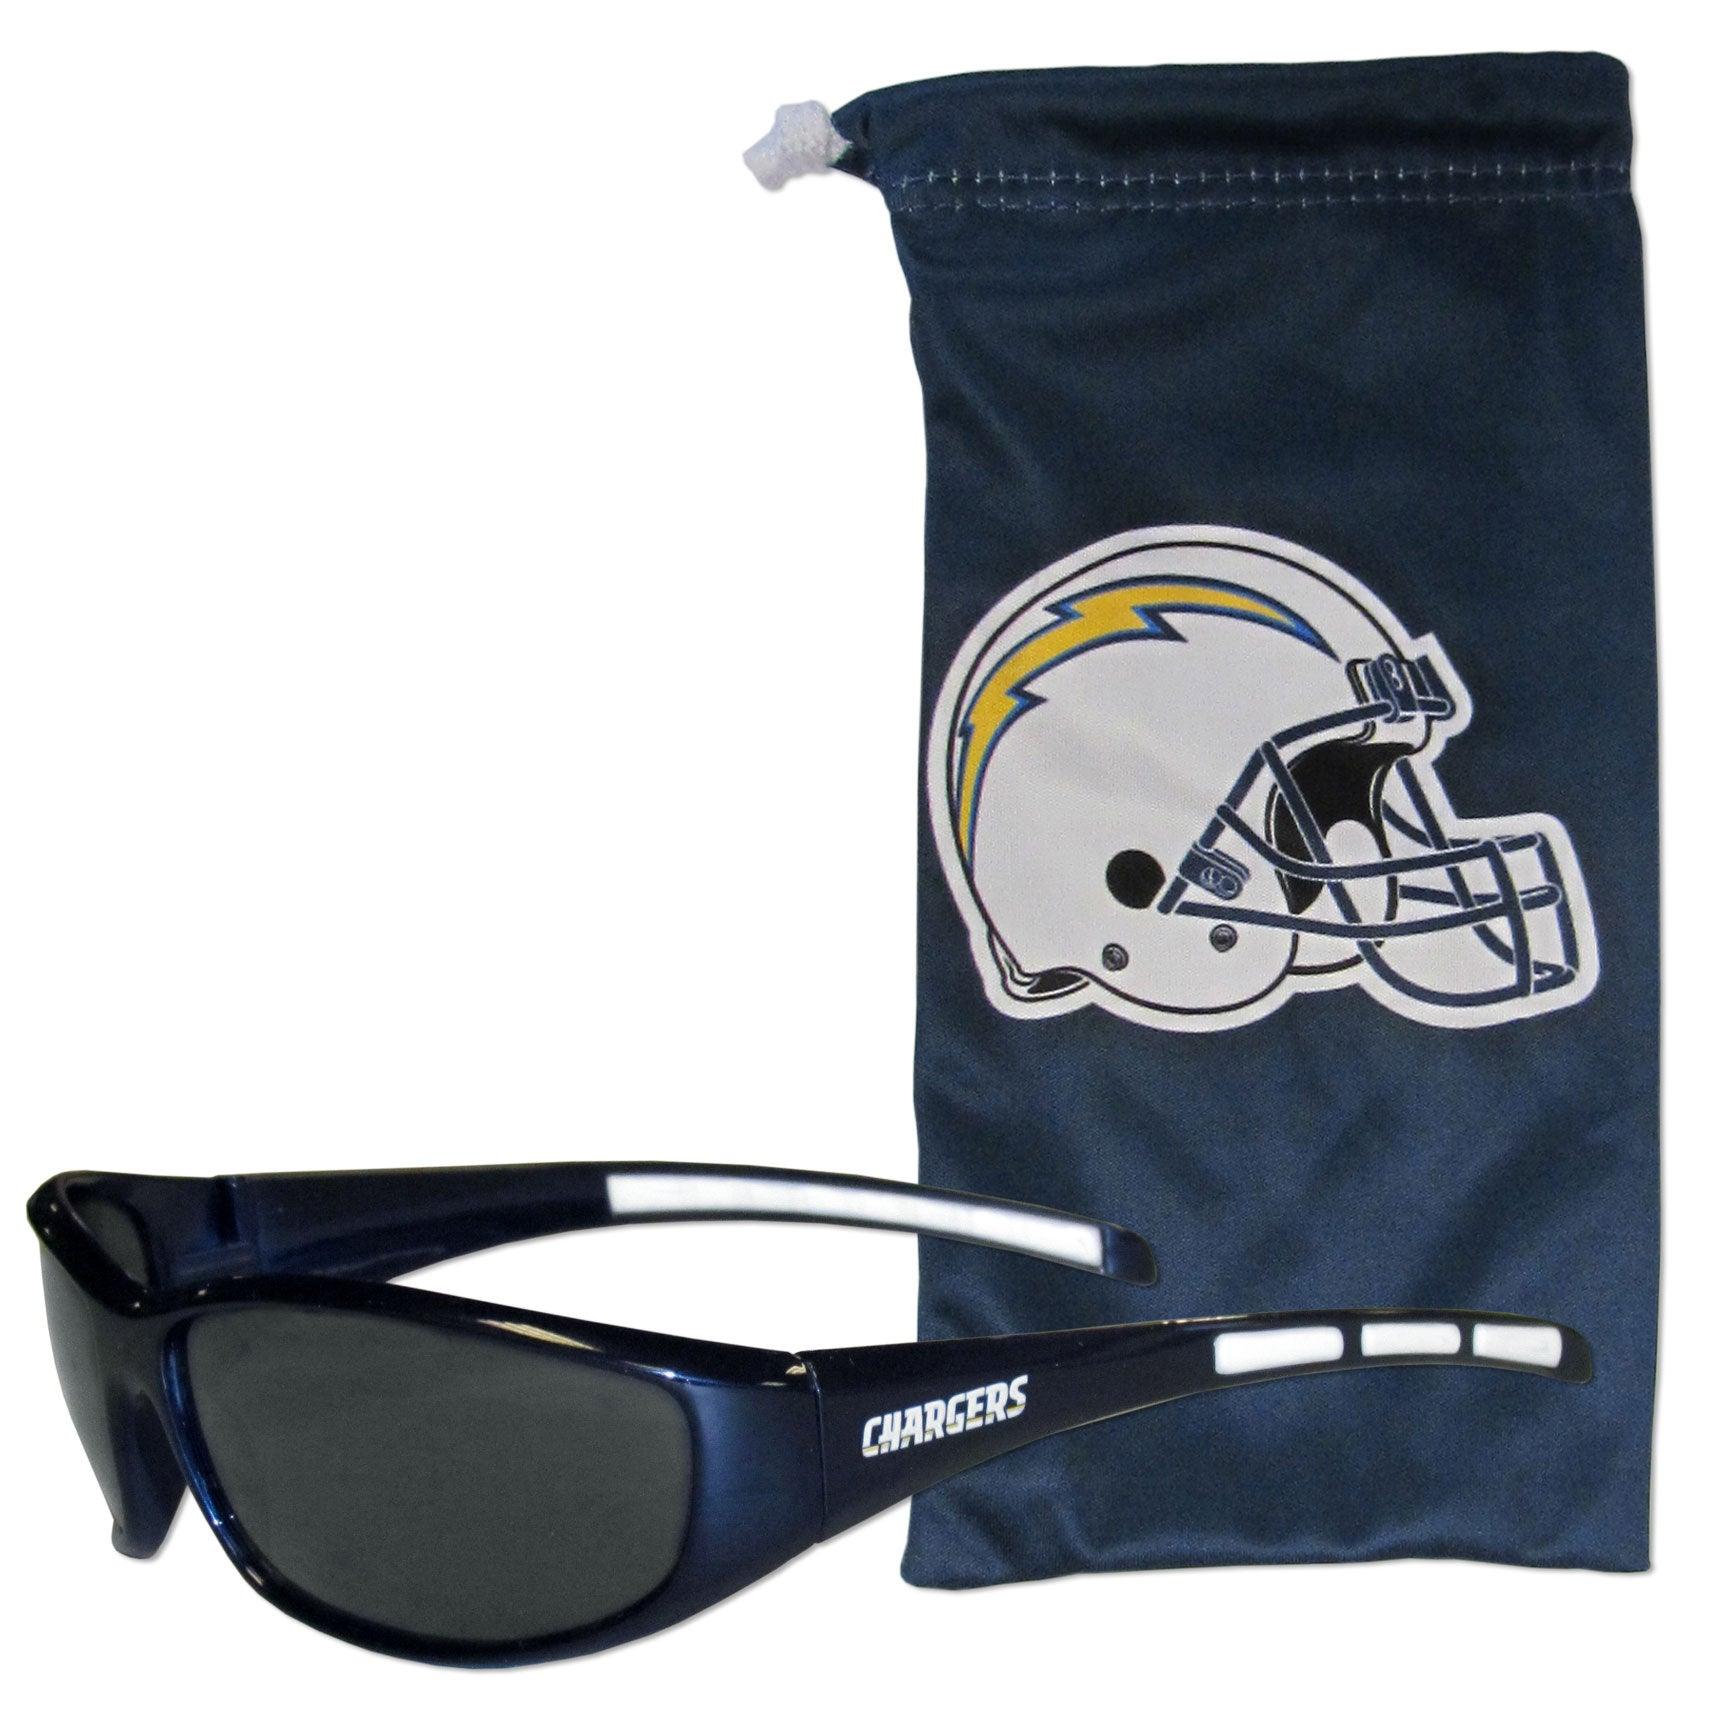 Los Angeles Chargers Sunglass and Bag Set - Flyclothing LLC